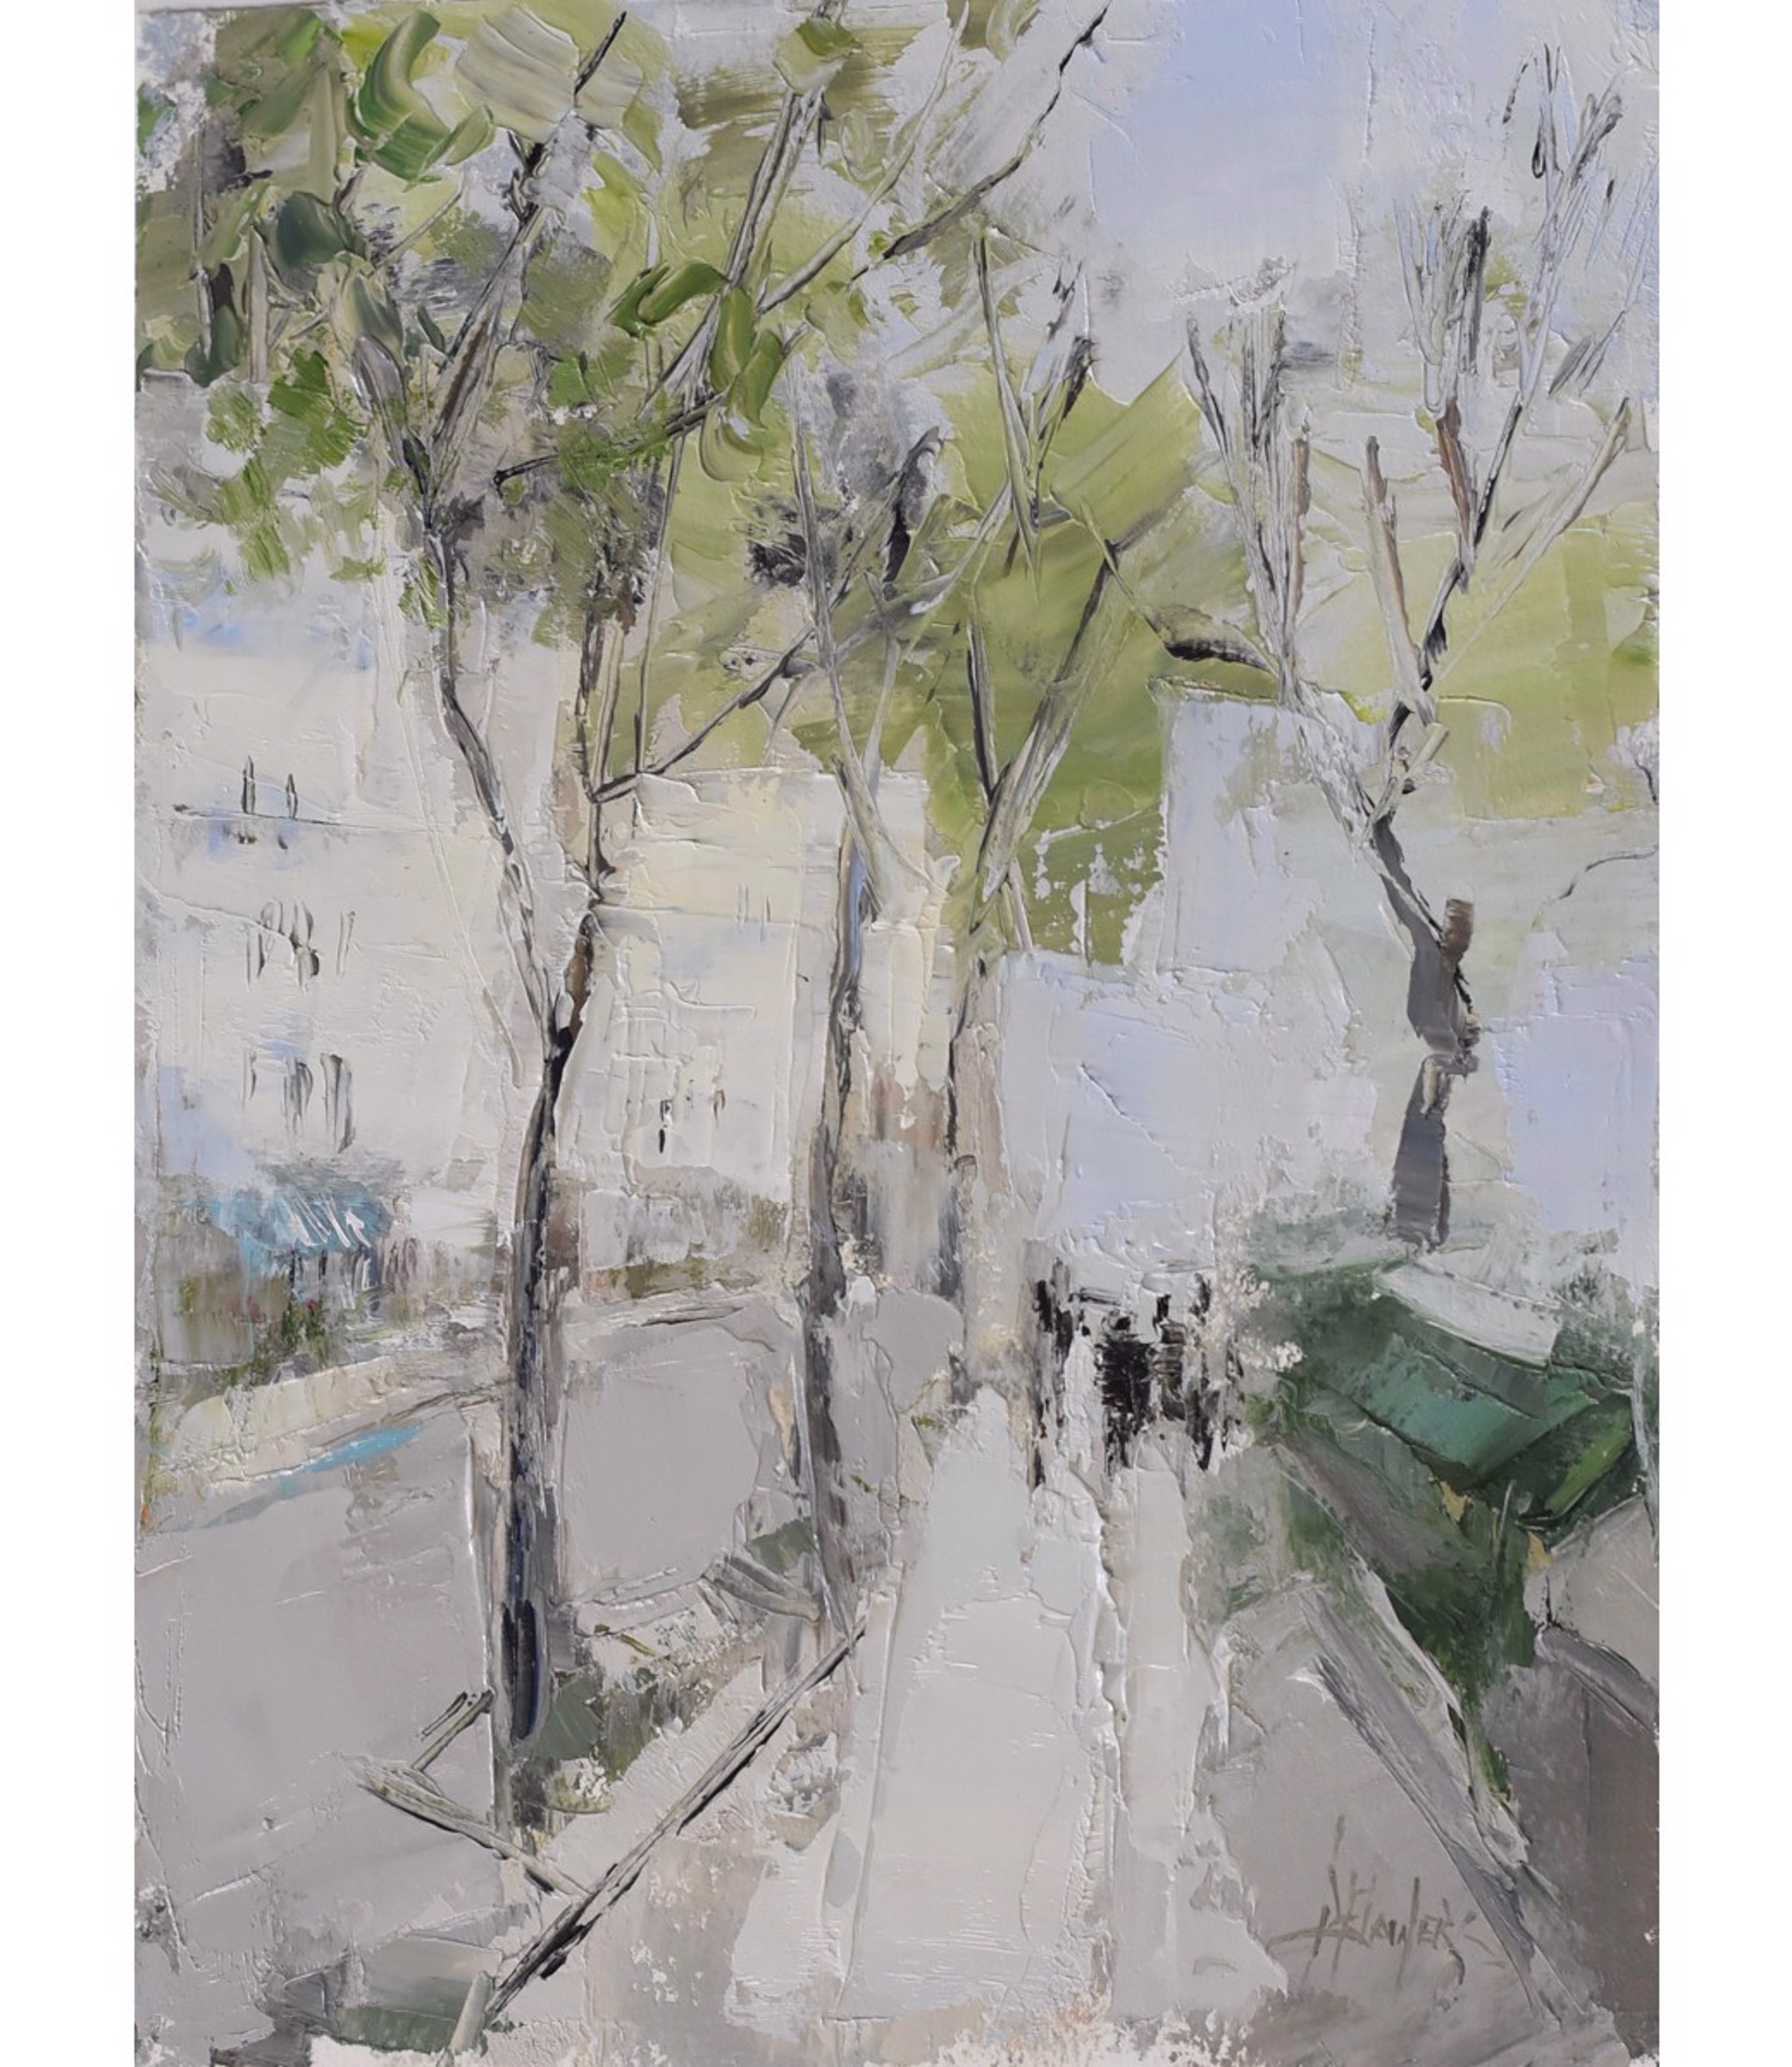 Passing by Bouquinistes, Paris by Barbara Flowers